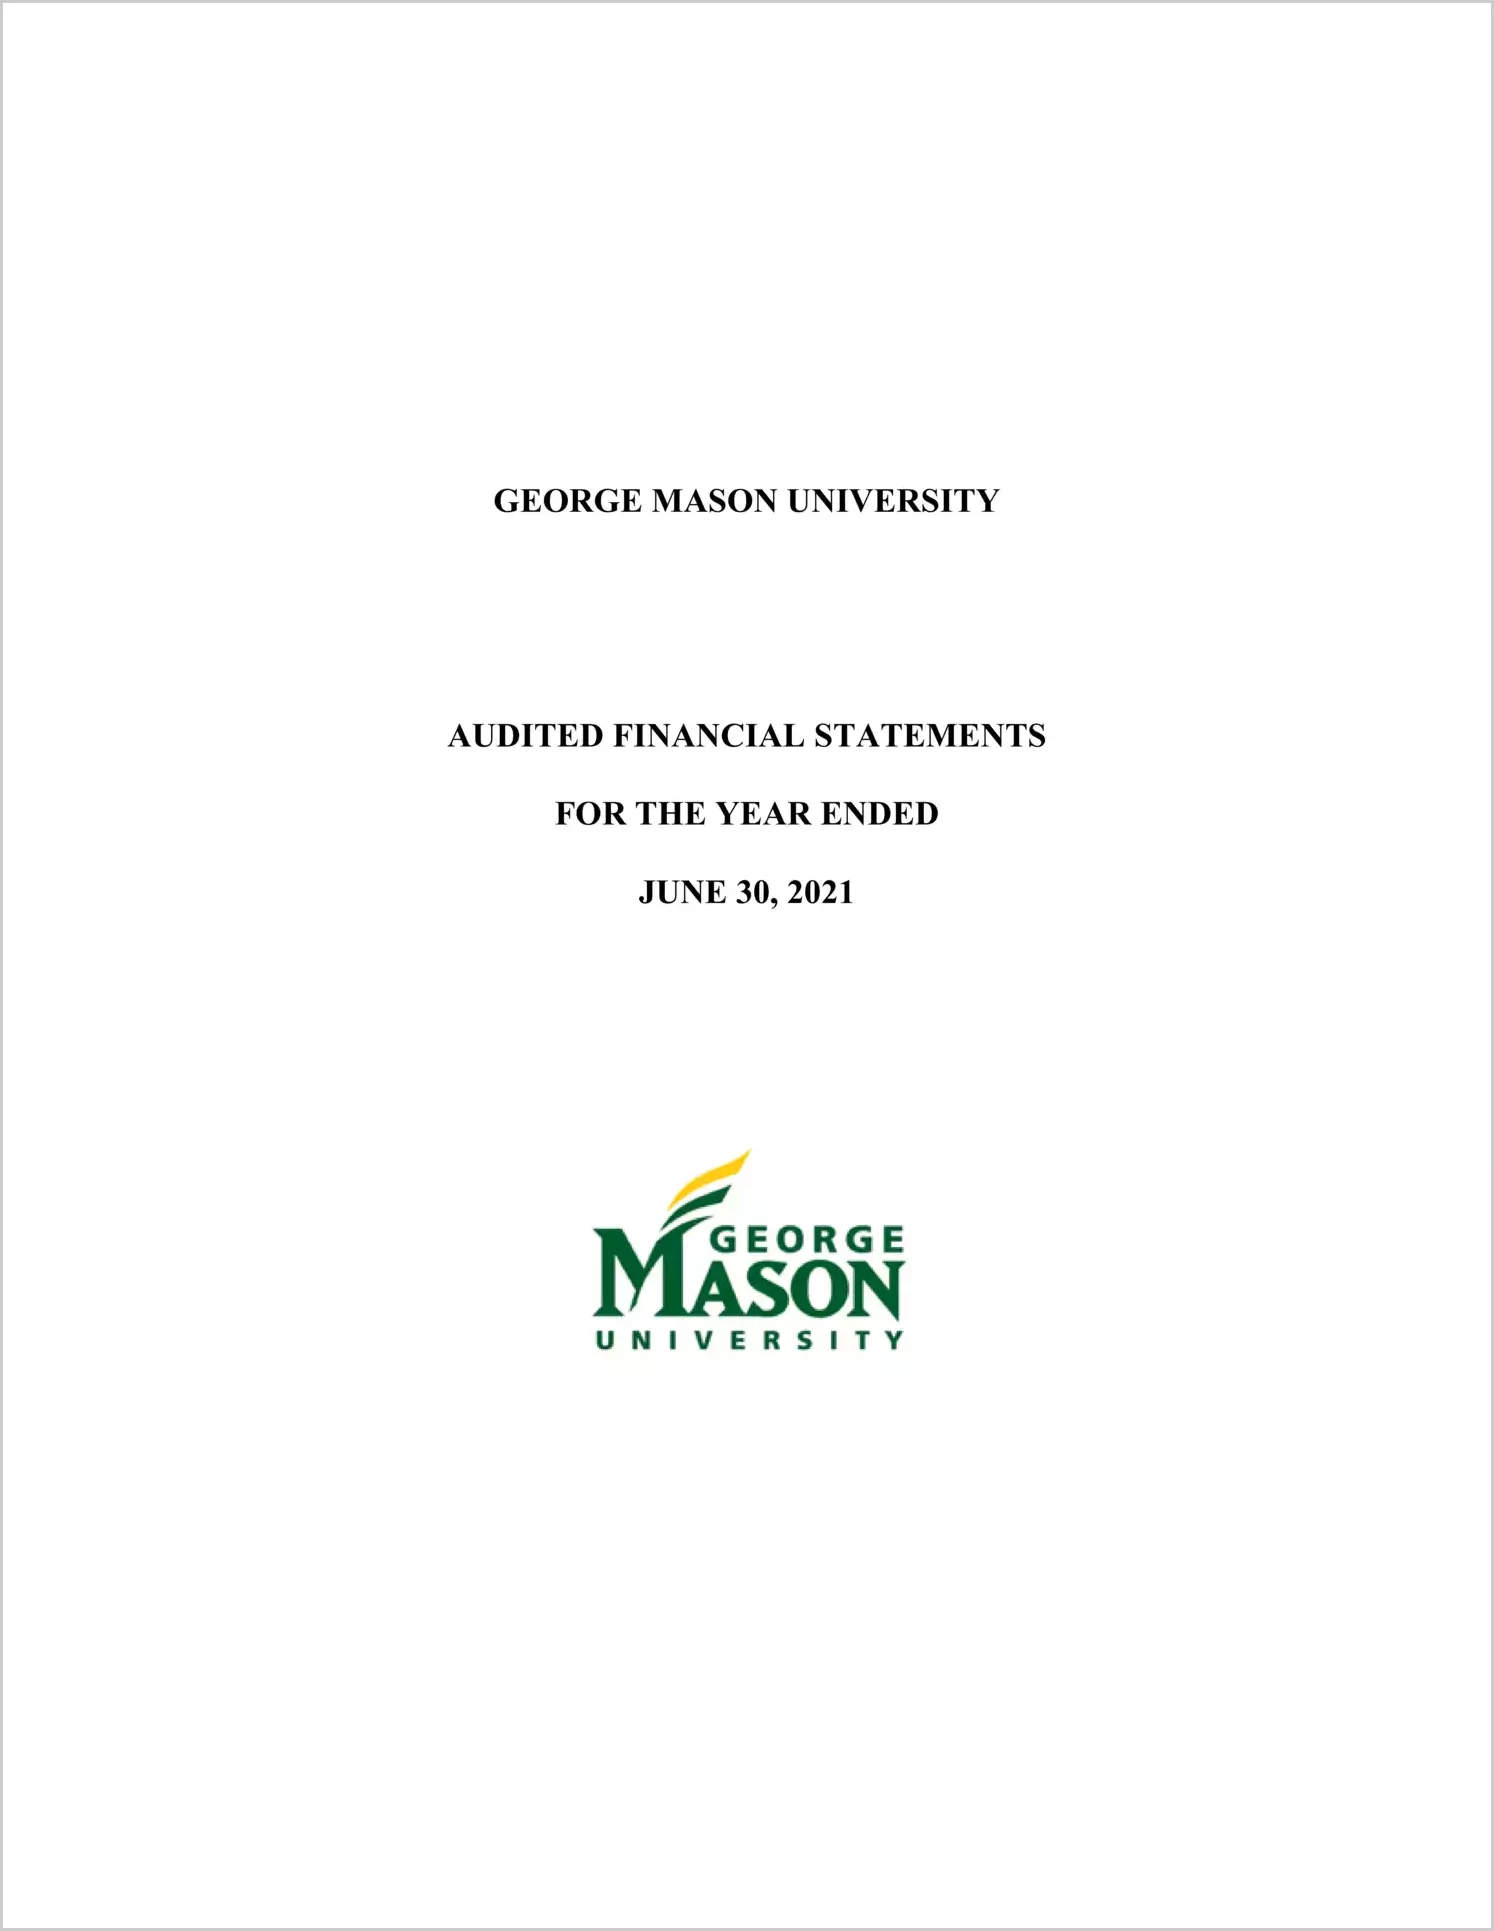 George Mason University Financial Statements for the year ended June 30, 2021